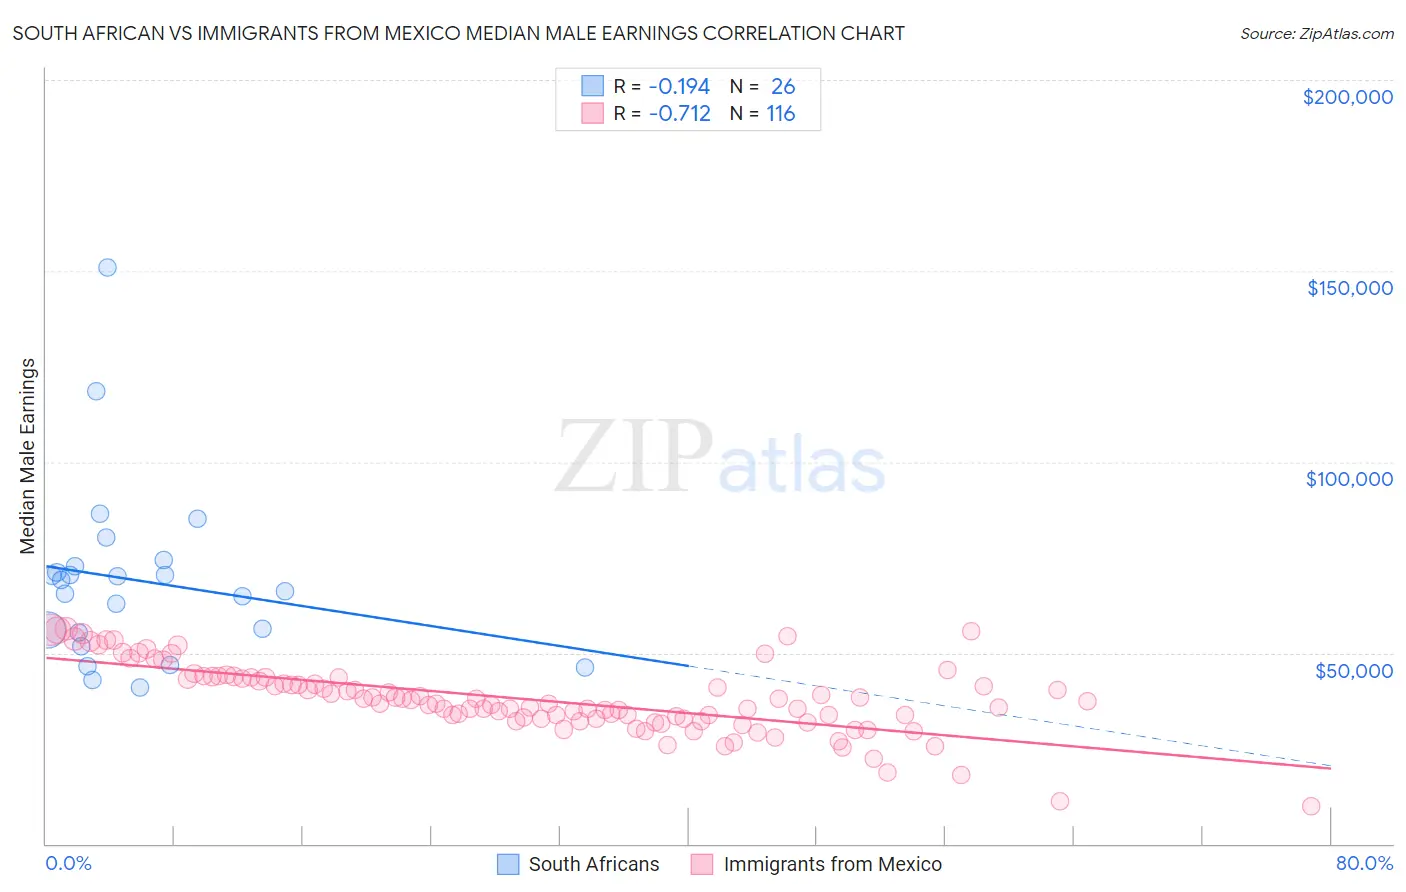 South African vs Immigrants from Mexico Median Male Earnings